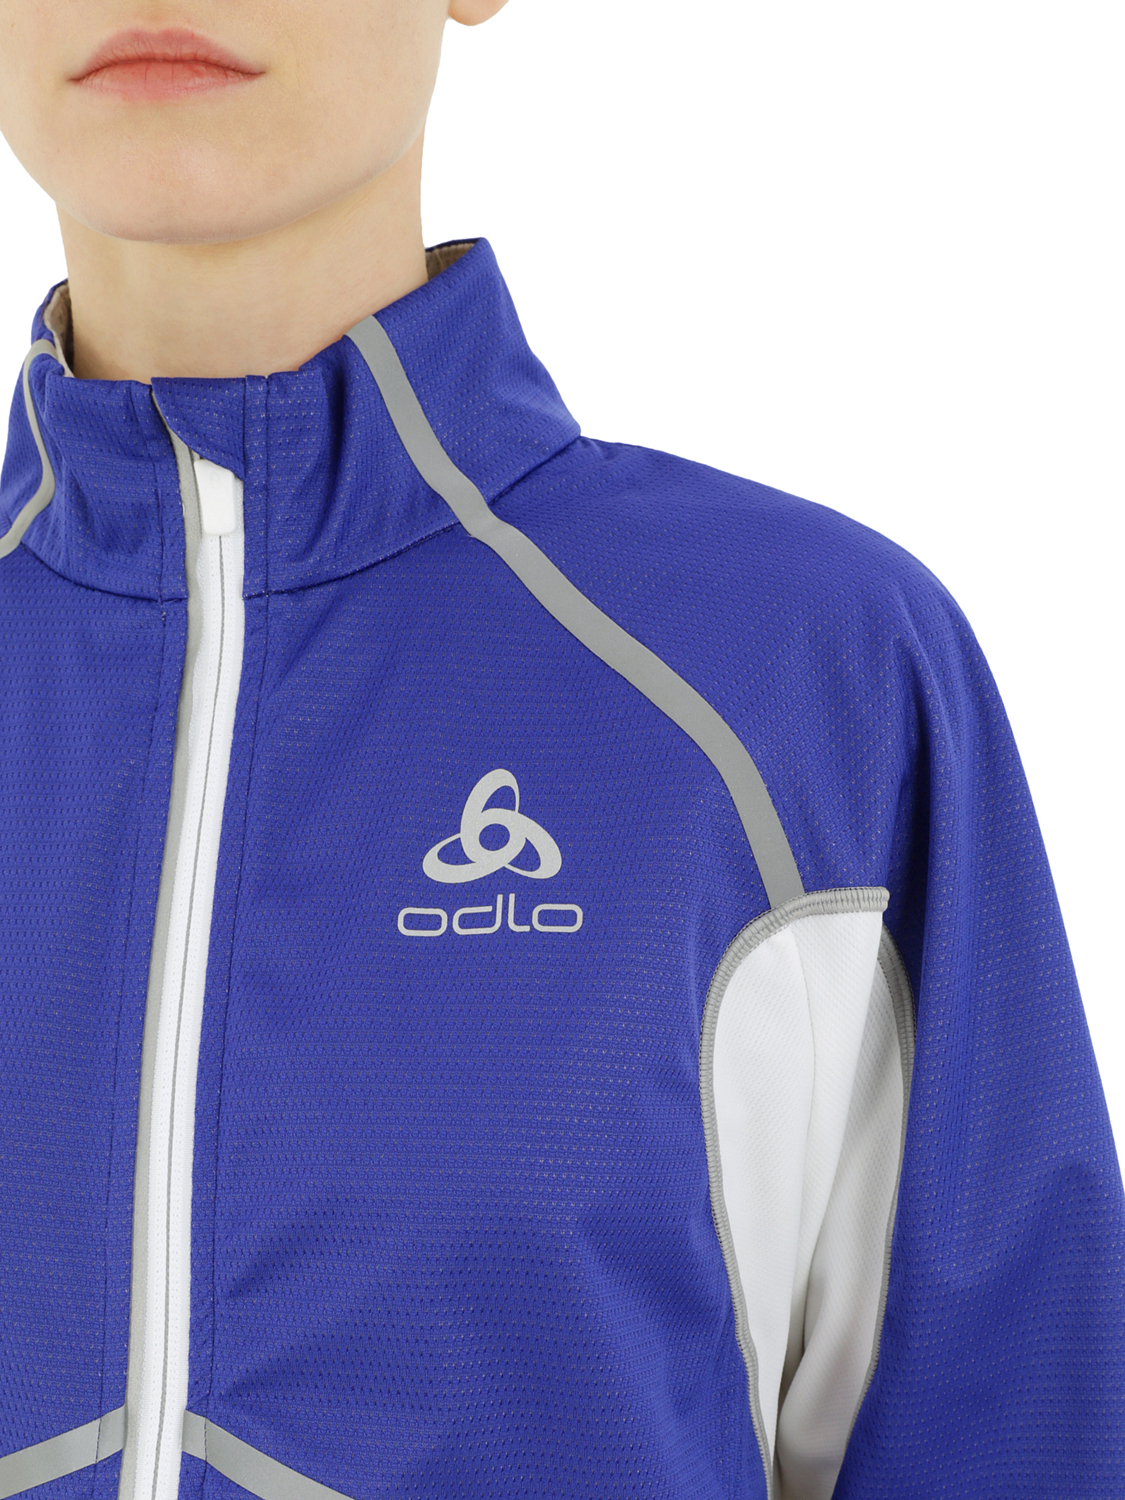 Куртка ODLO Jacket FREQUENCY X Clematis Blue-White